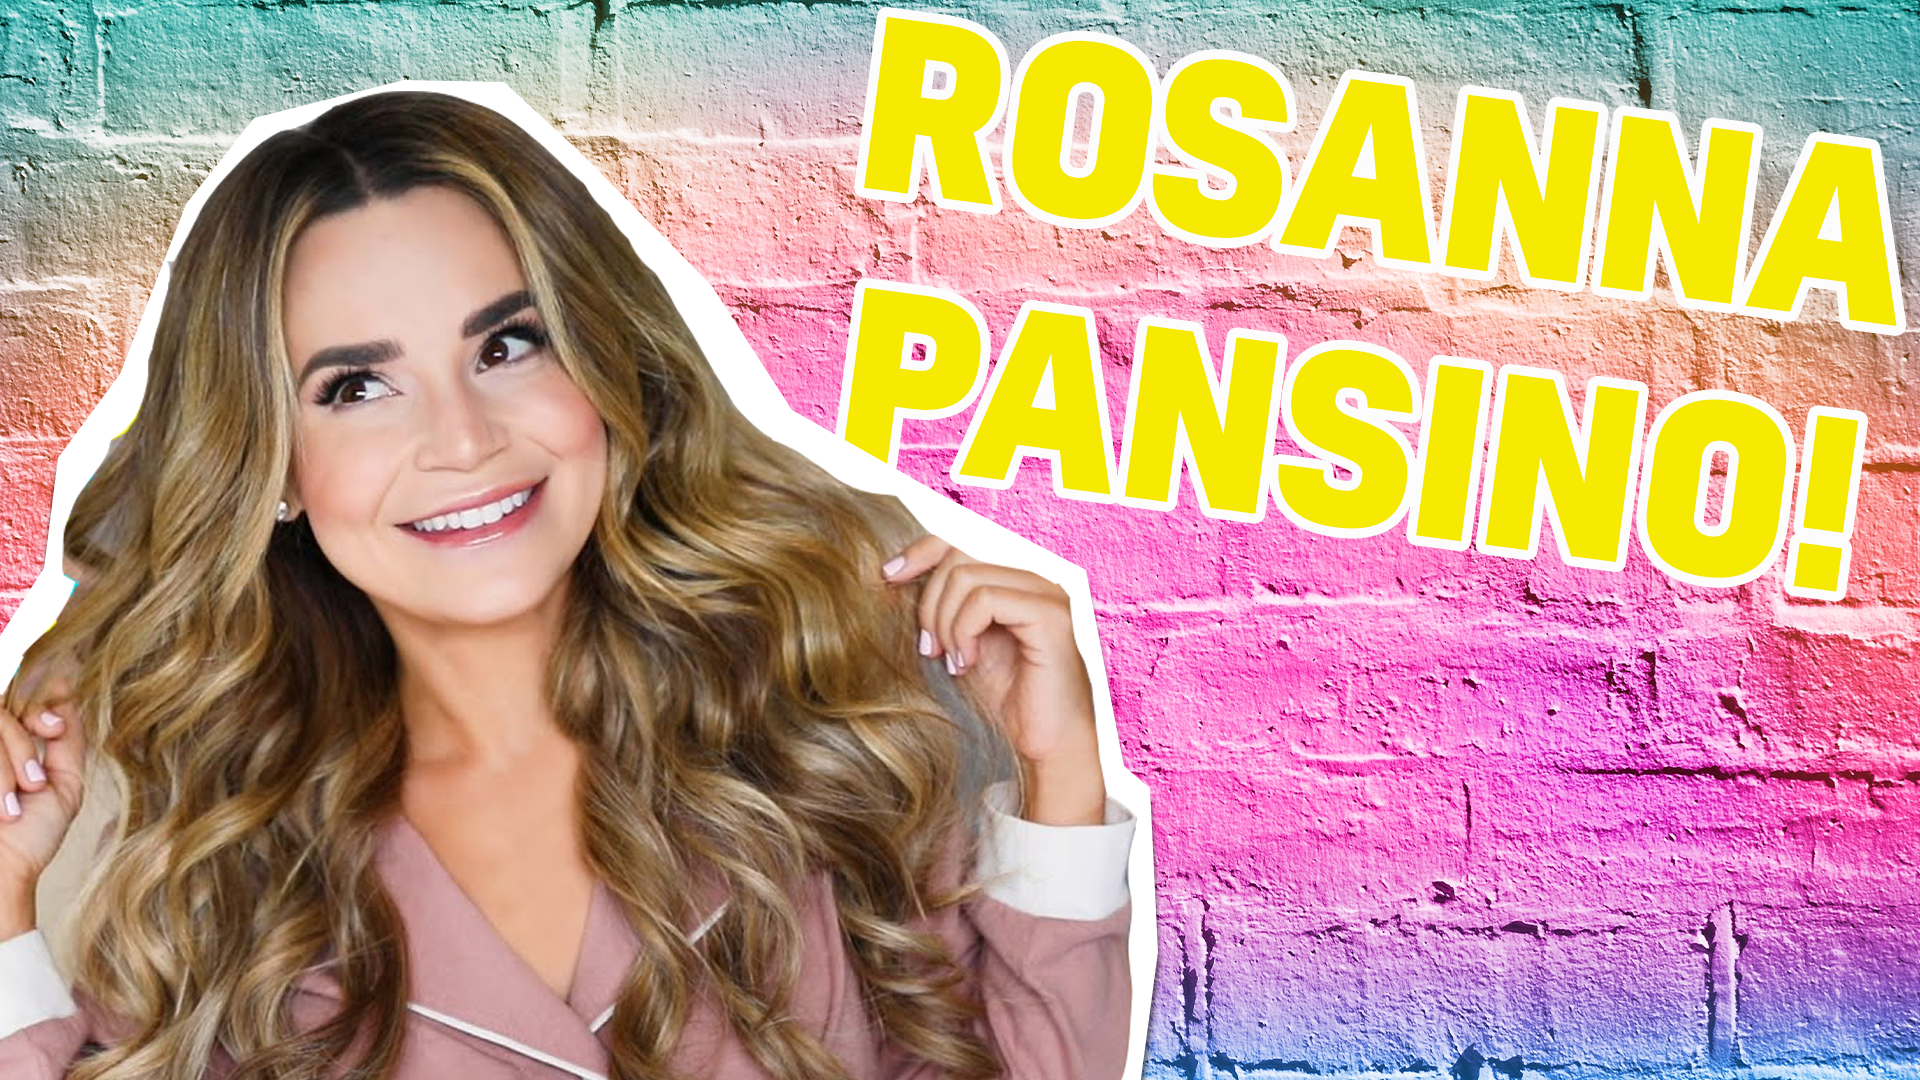 Not only is Rosanna the queen of cakes, she's also a pro at GRWM routines! Rosanna is such a ray of sunshine that this video is bound to brighten the dullest day!